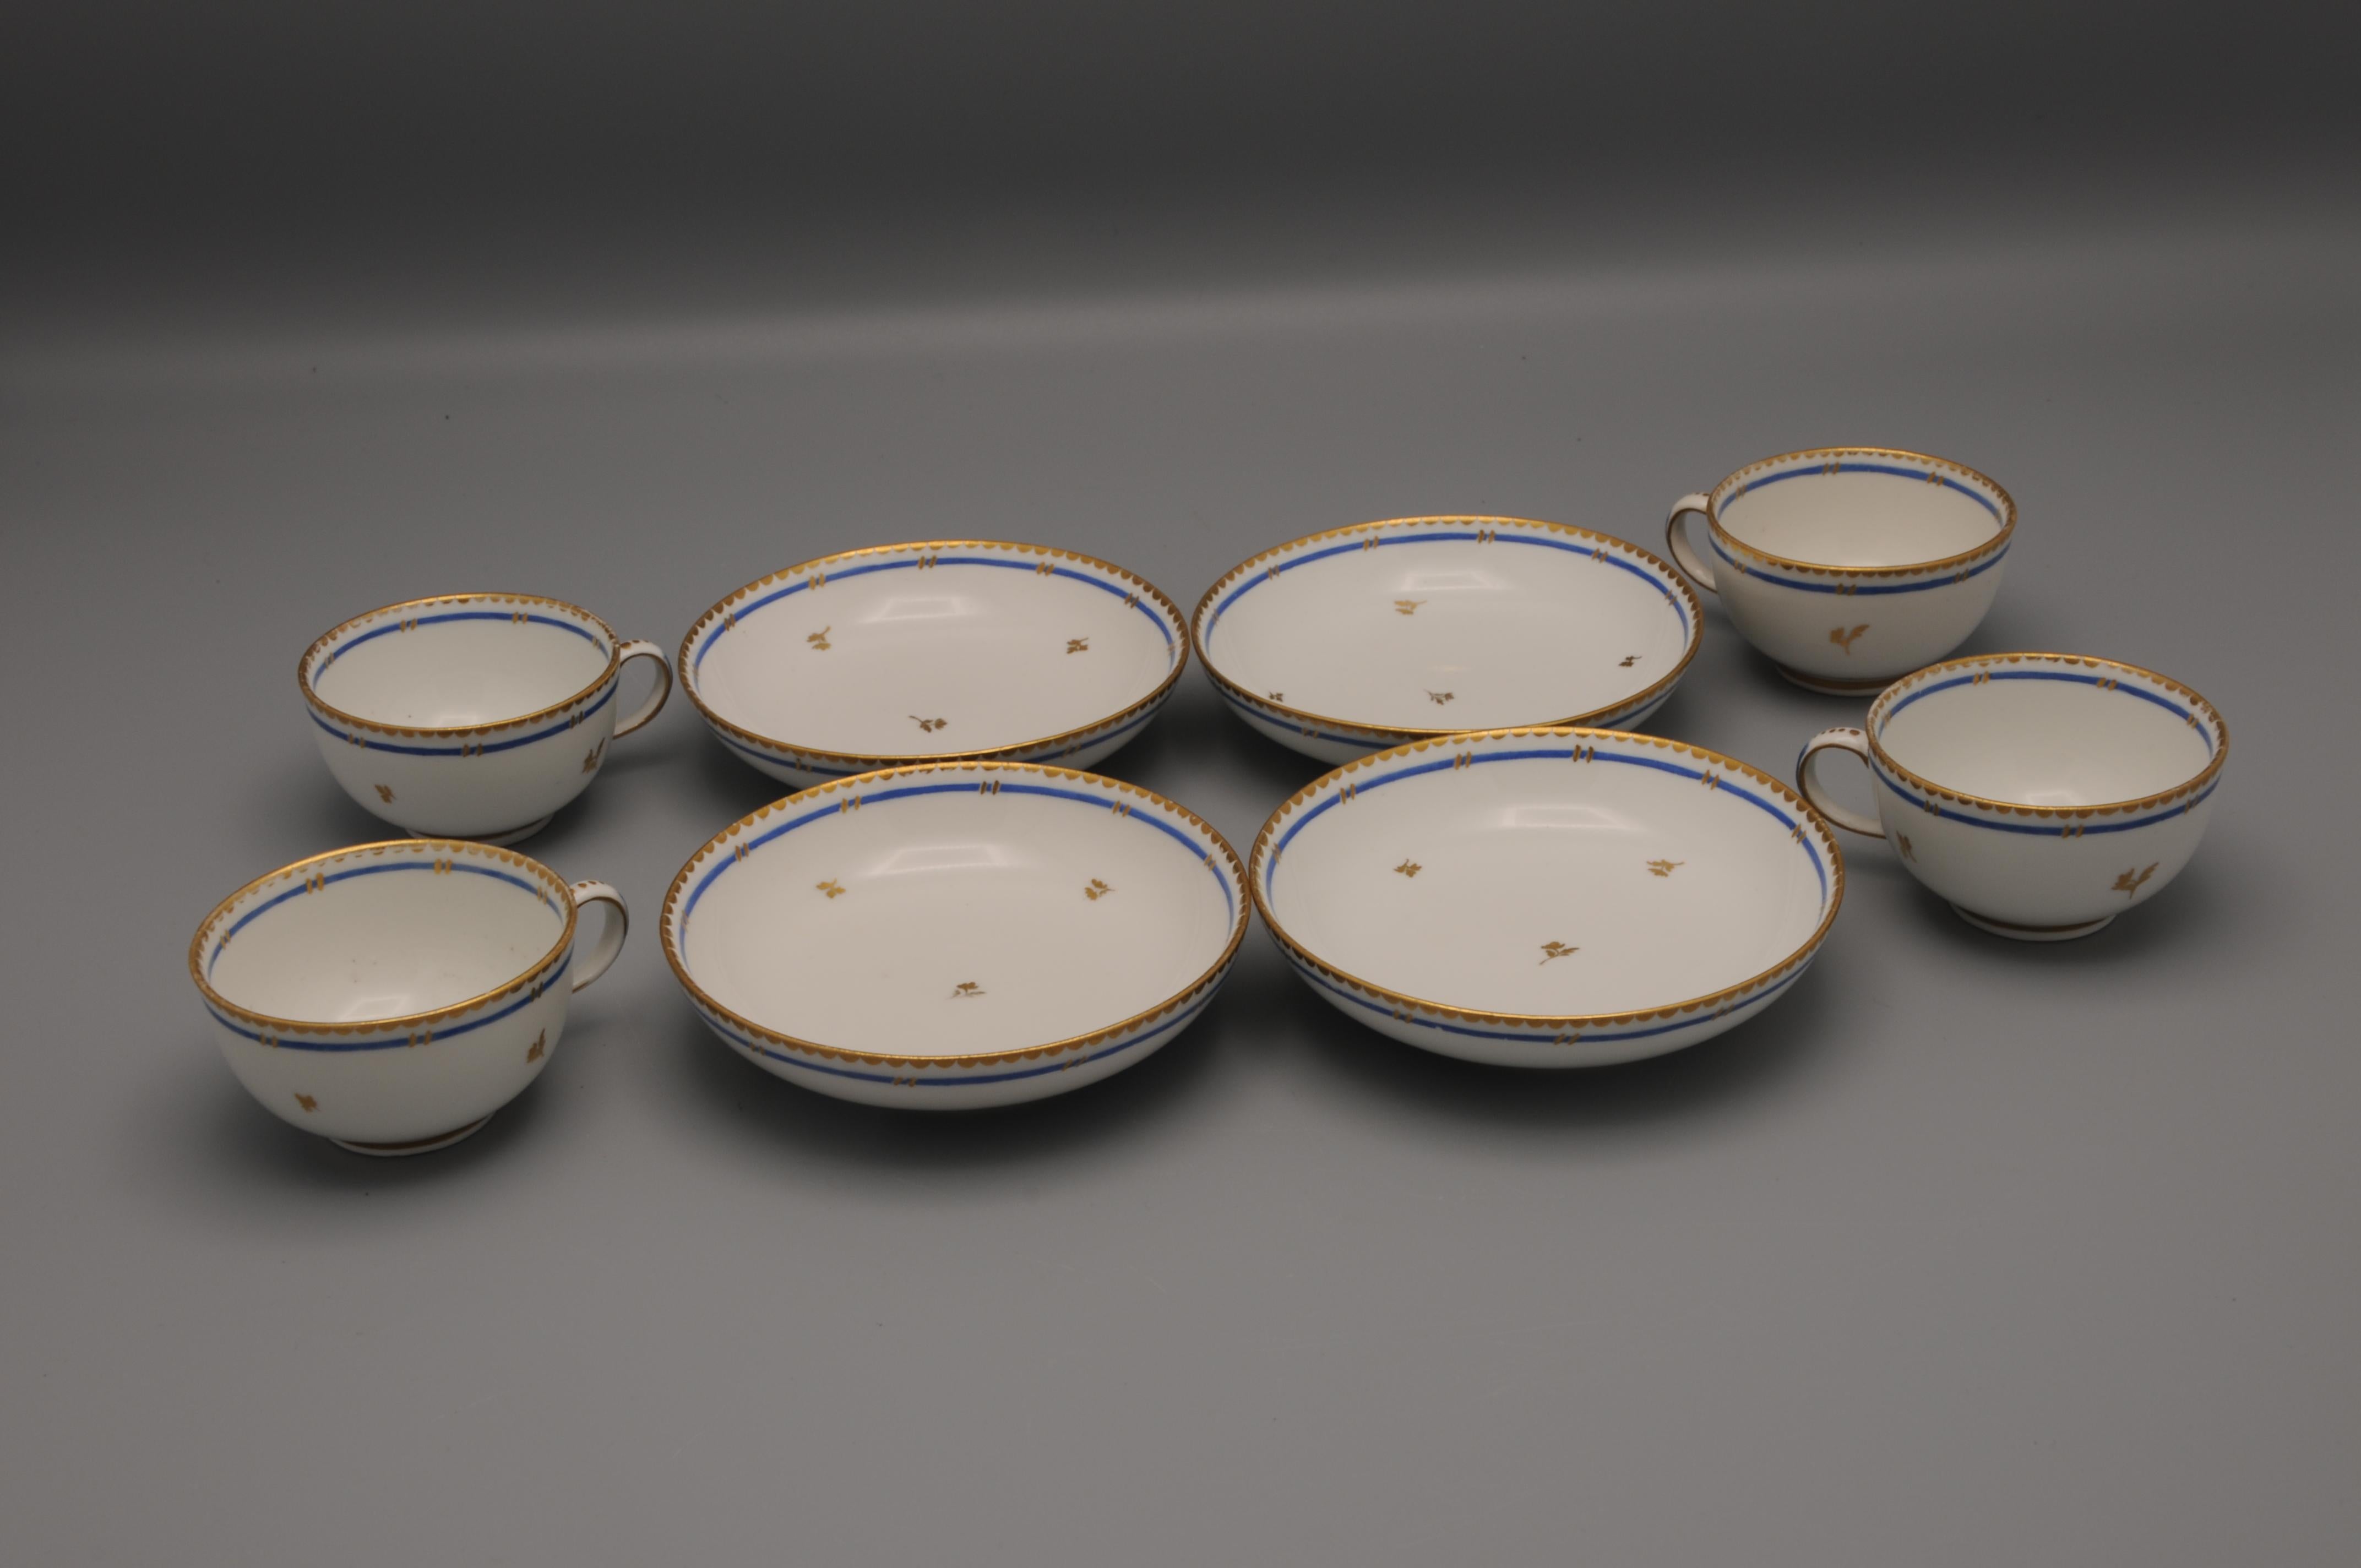 Vienna porcelain - 4 cups and saucers, 1781 For Sale 1